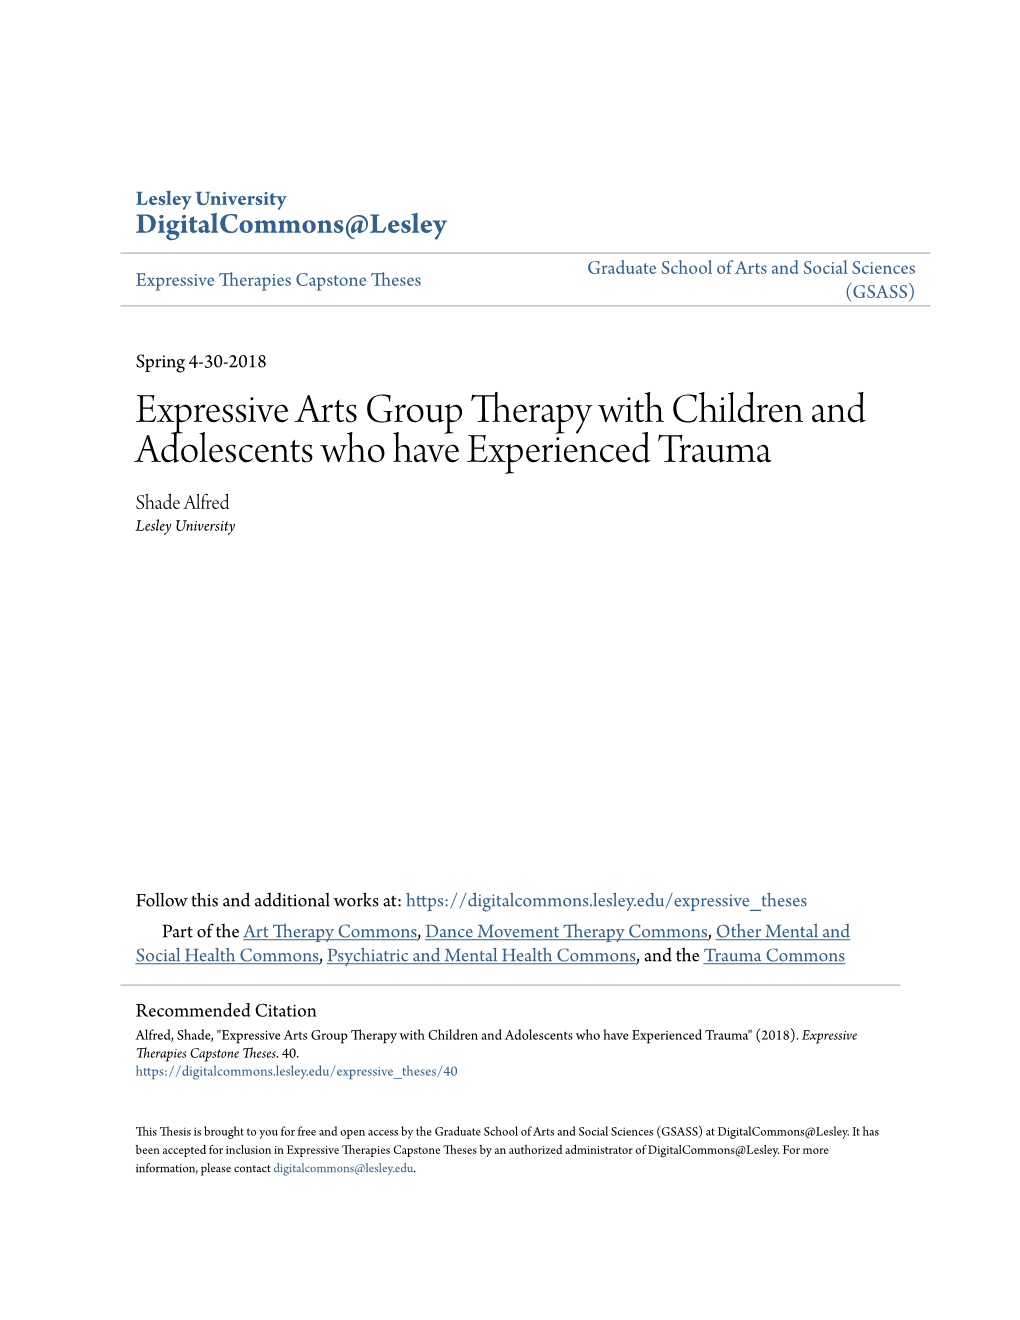 Expressive Arts Group Therapy with Children and Adolescents Who Have Experienced Trauma Shade Alfred Lesley University